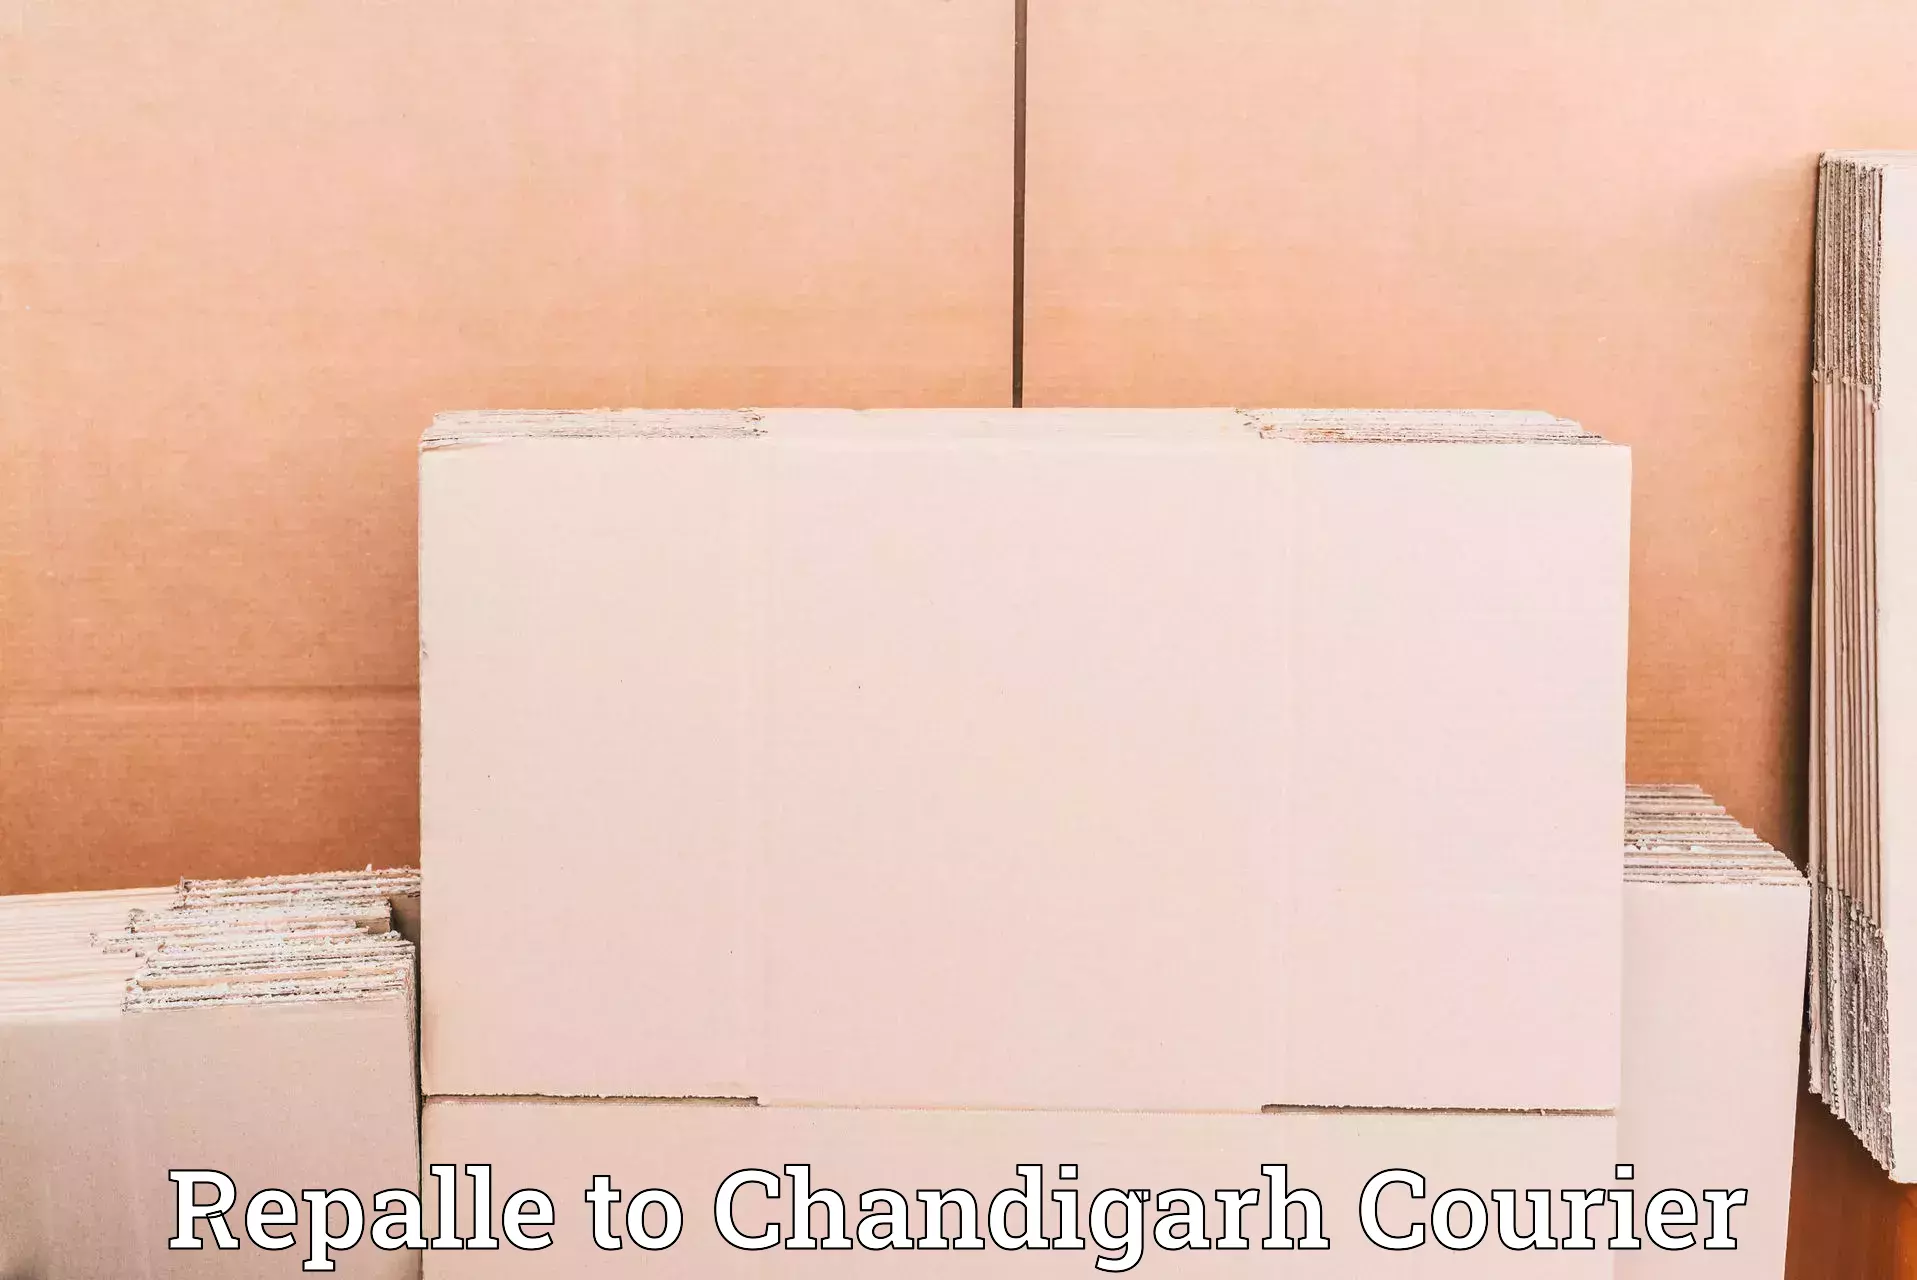 Innovative courier solutions Repalle to Panjab University Chandigarh